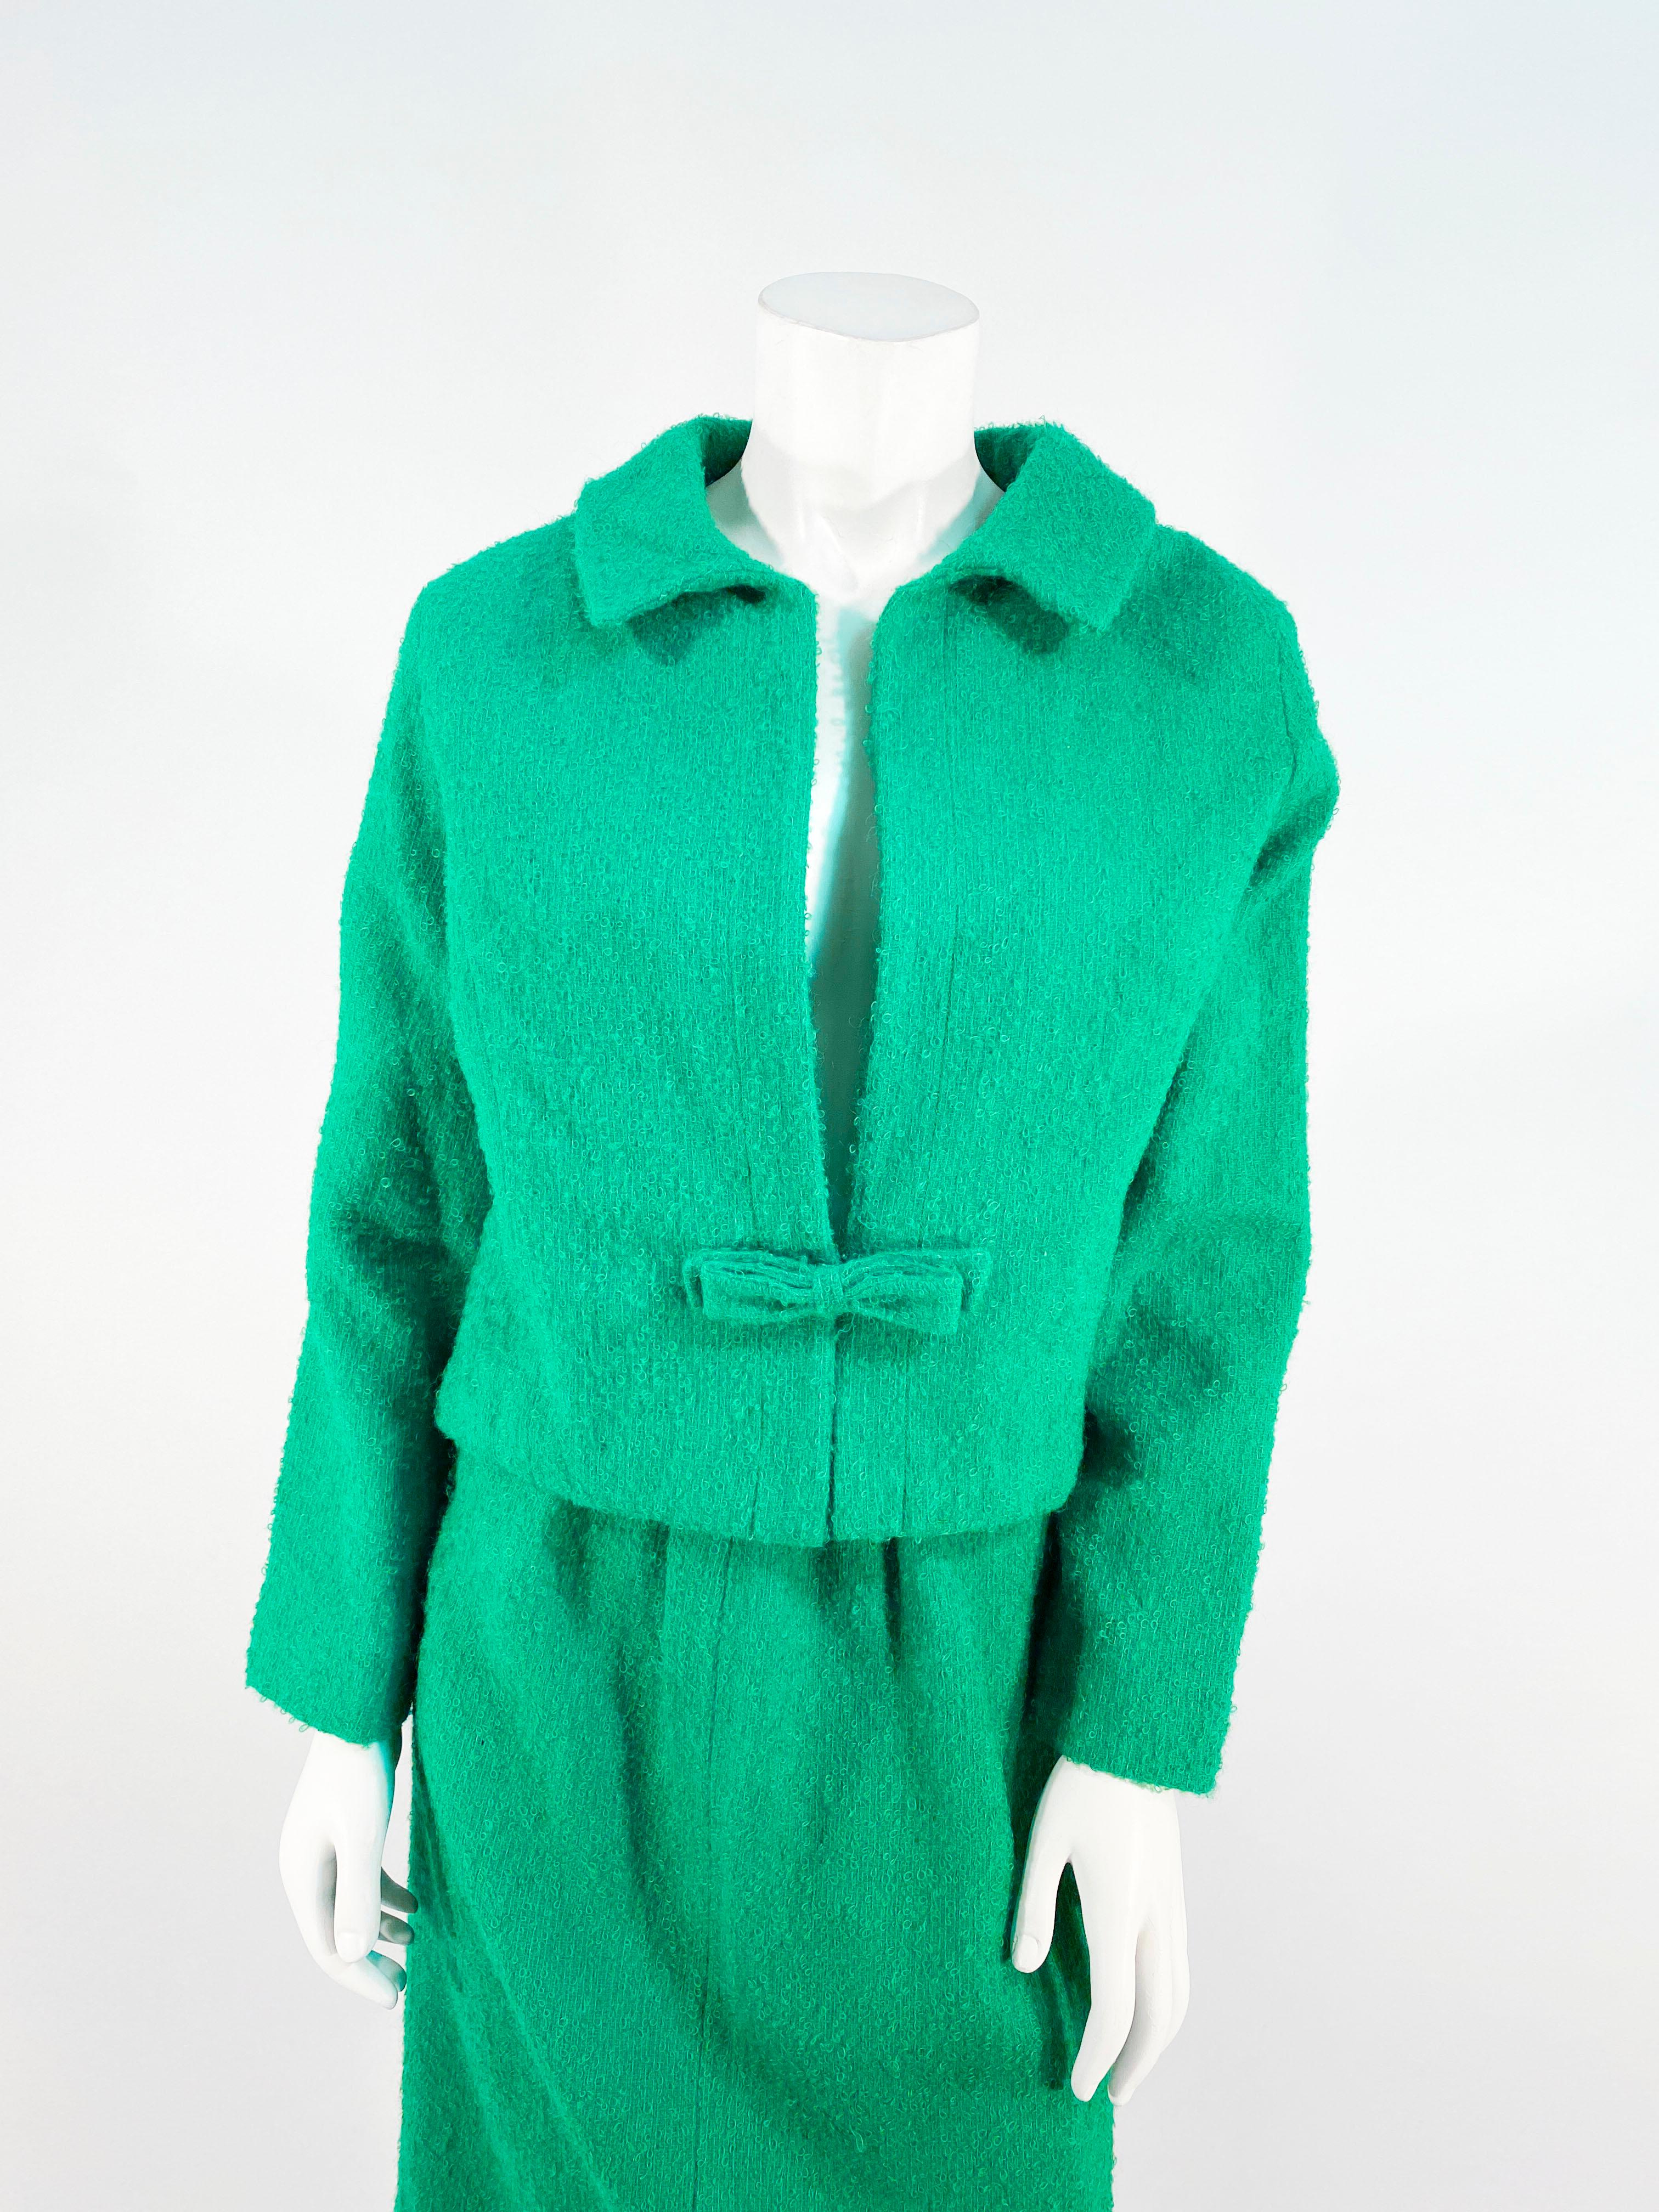 1980s Saks Fifth Ave. kelly green mohair suit with a boxed style jacket with full length sleeves, interior lining, and a bow closure that creates a plunging neckline. The straight skirt has an applied waistline.